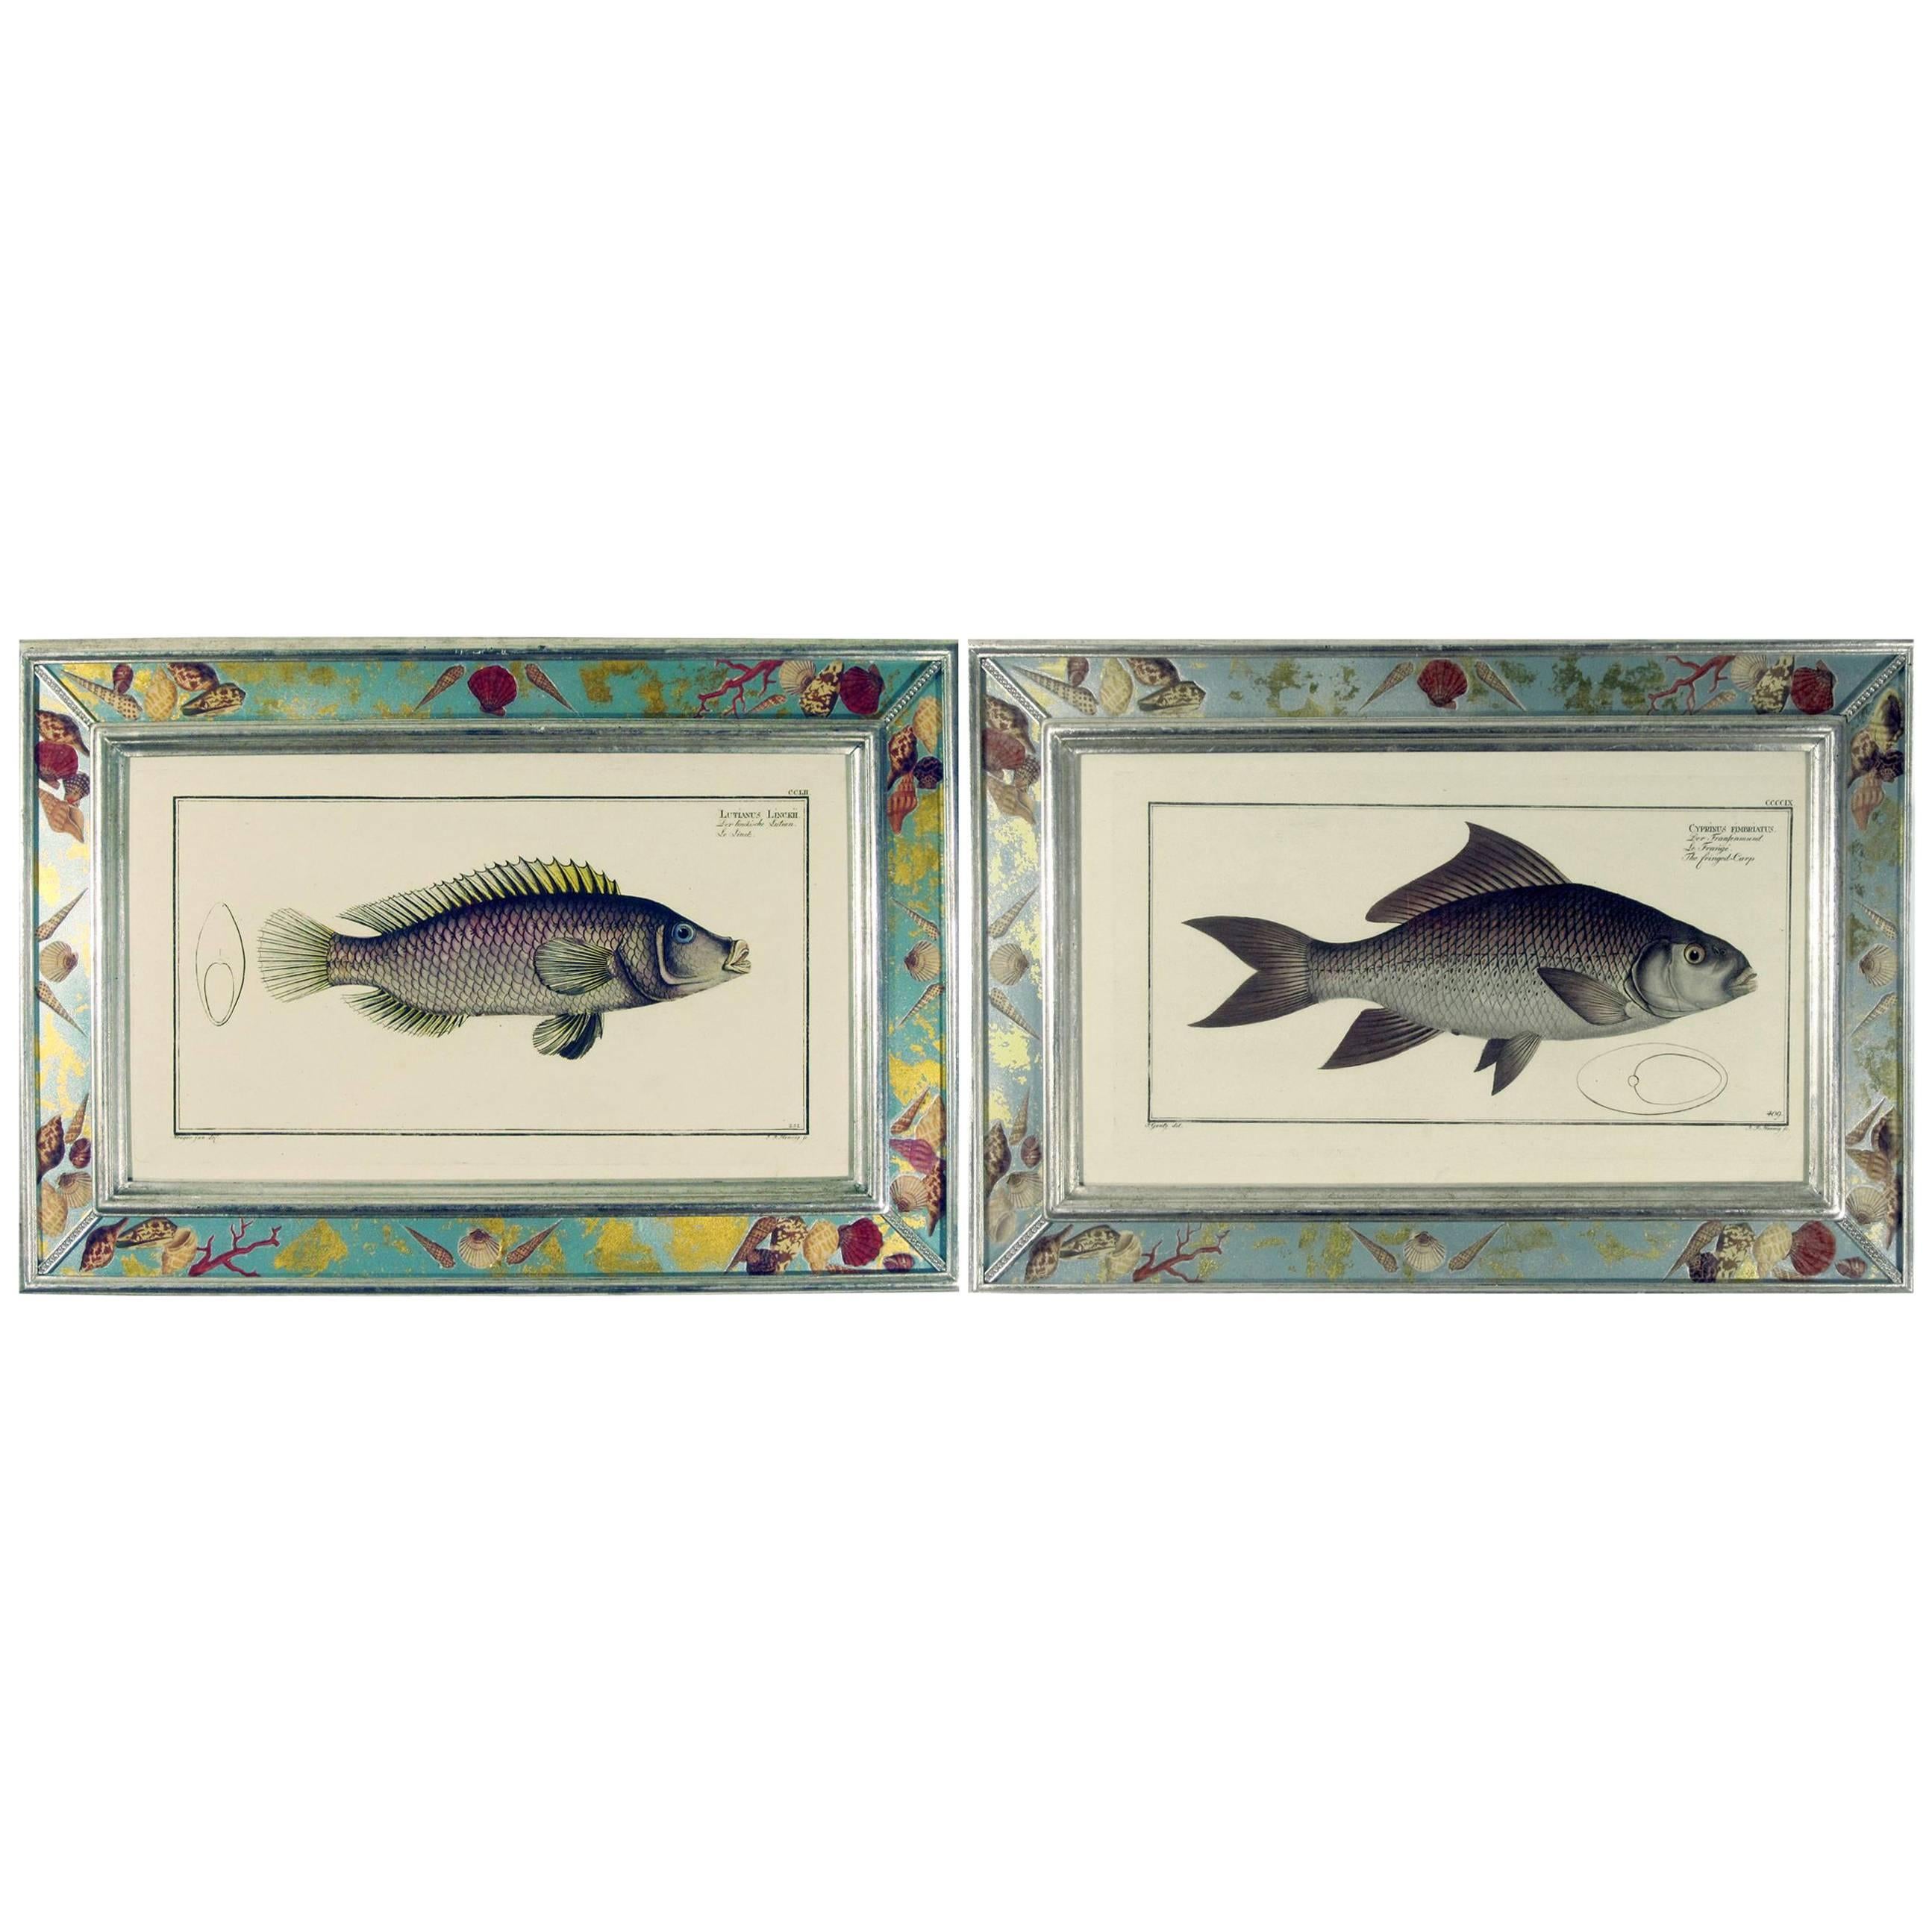 18th century Engravings of Fish by Marcus Bloch For Sale